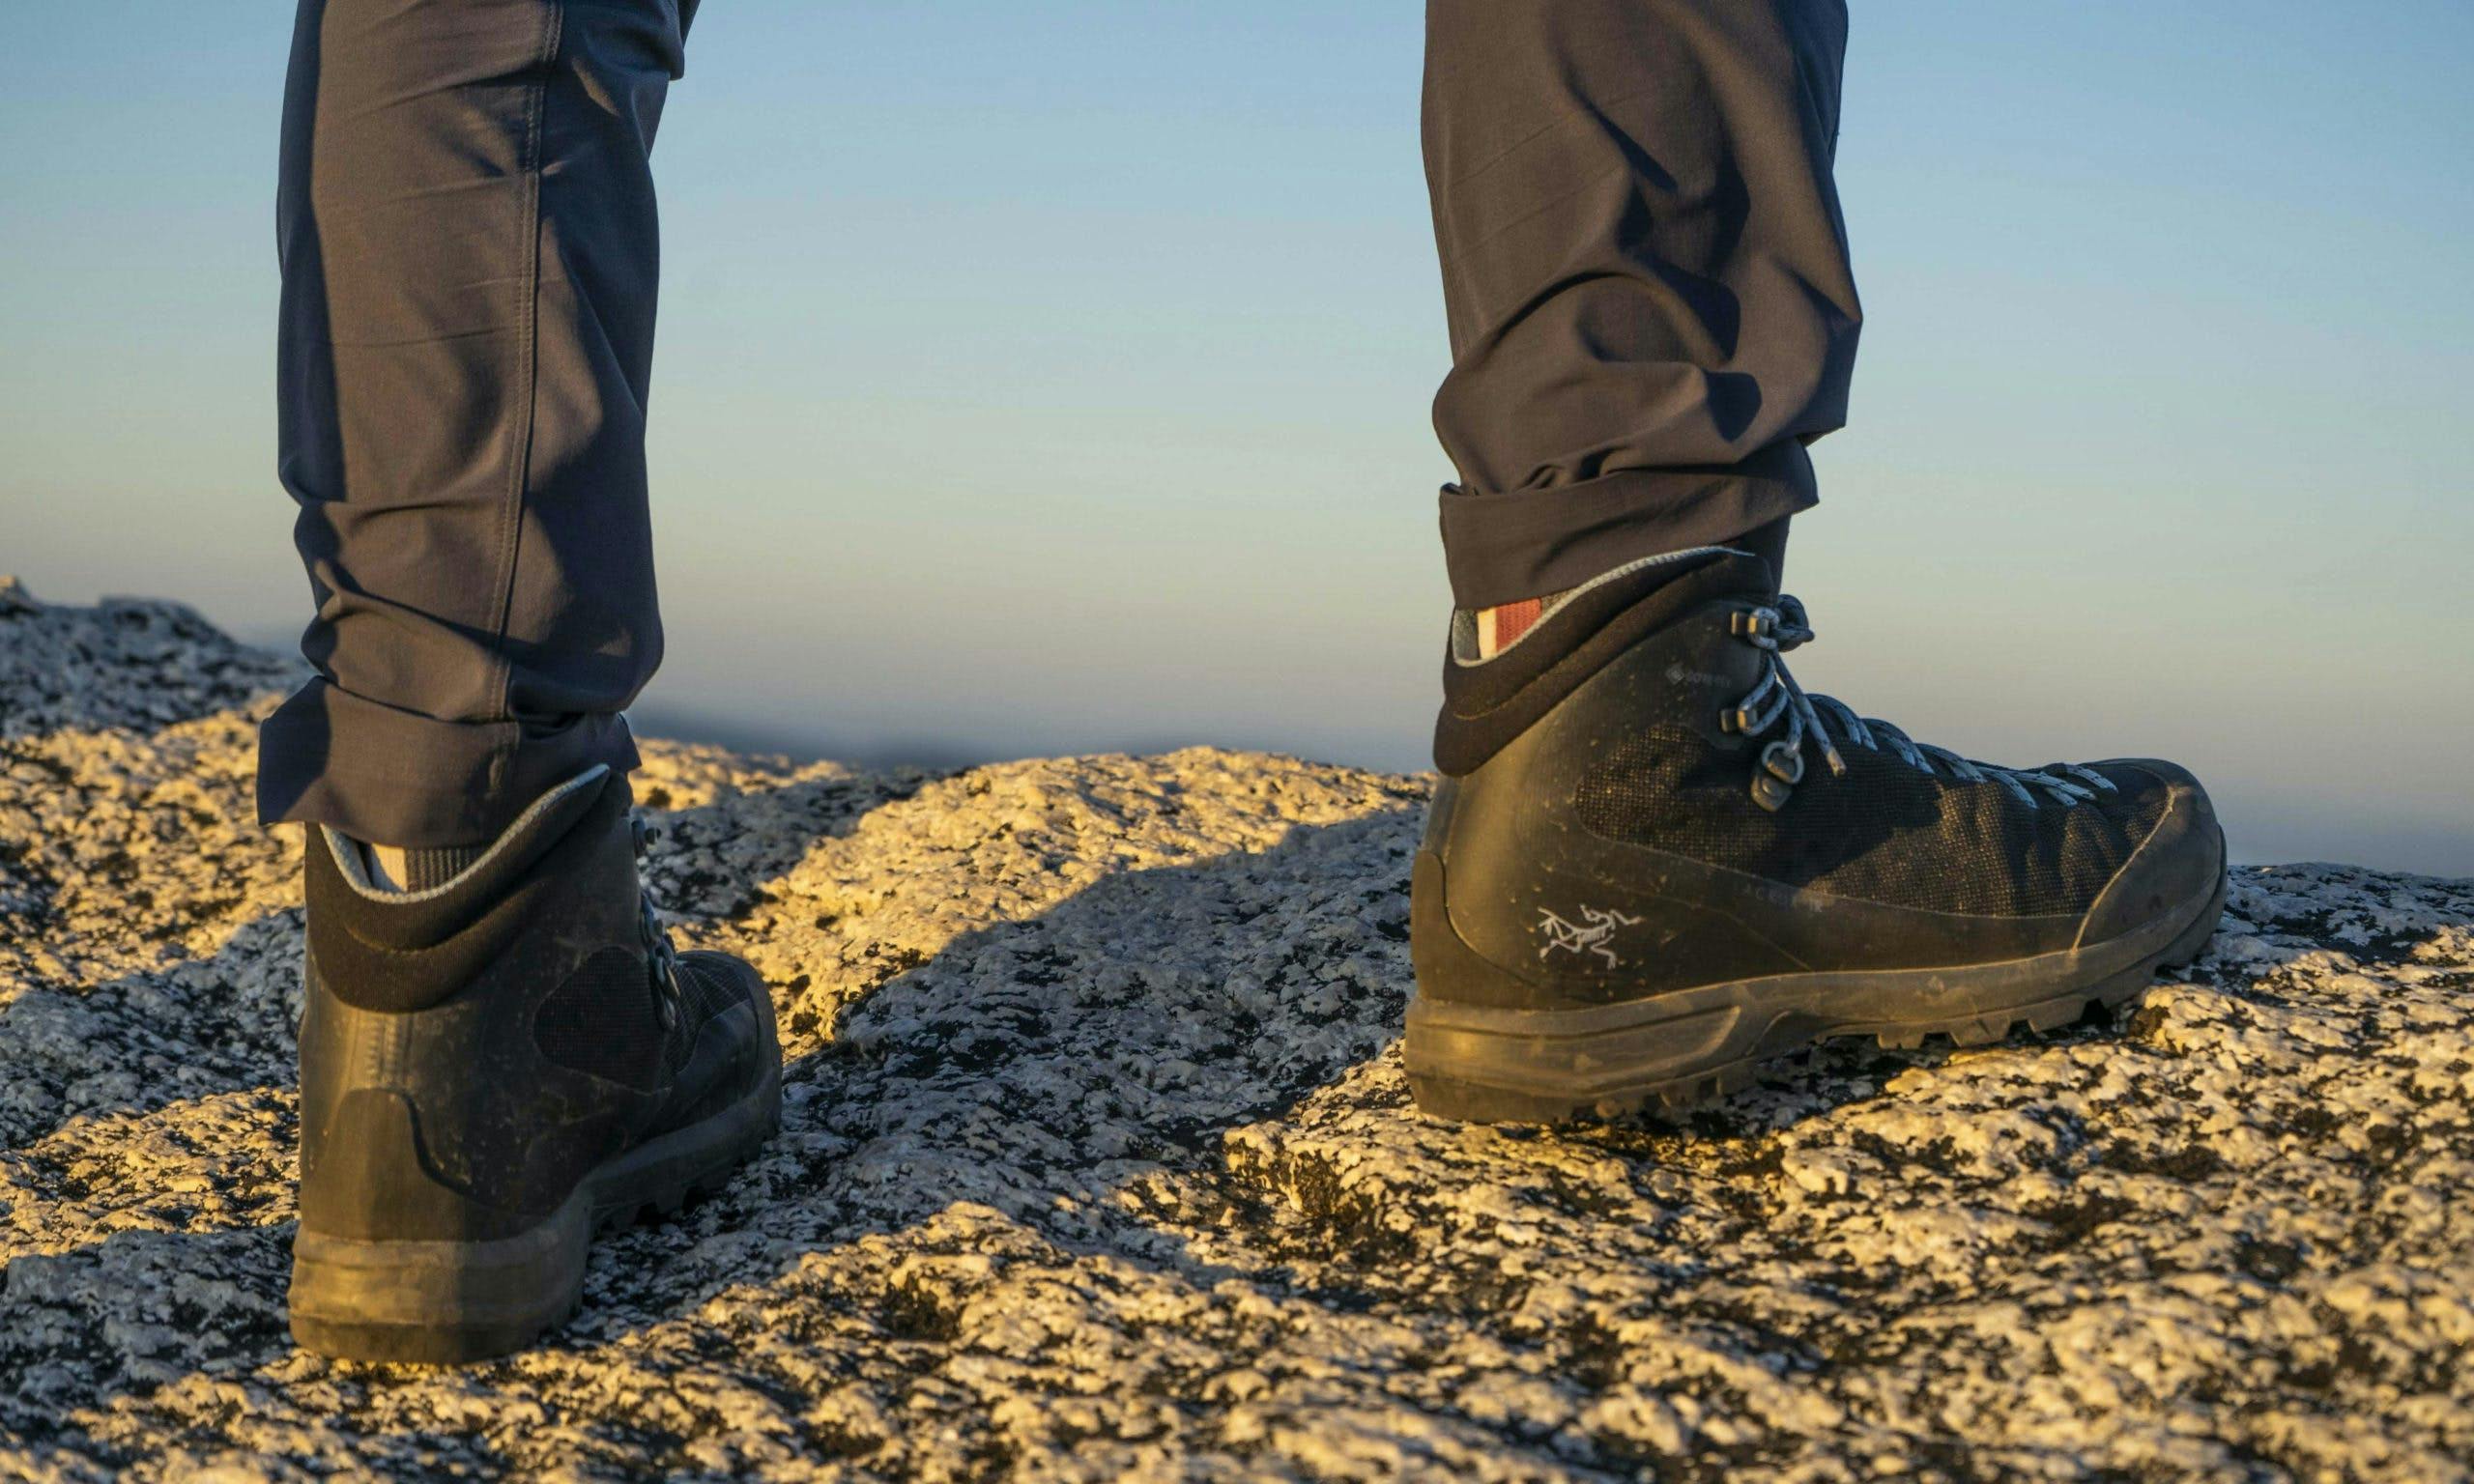 Close up shot of Arc'teryx hiking boots on a rock